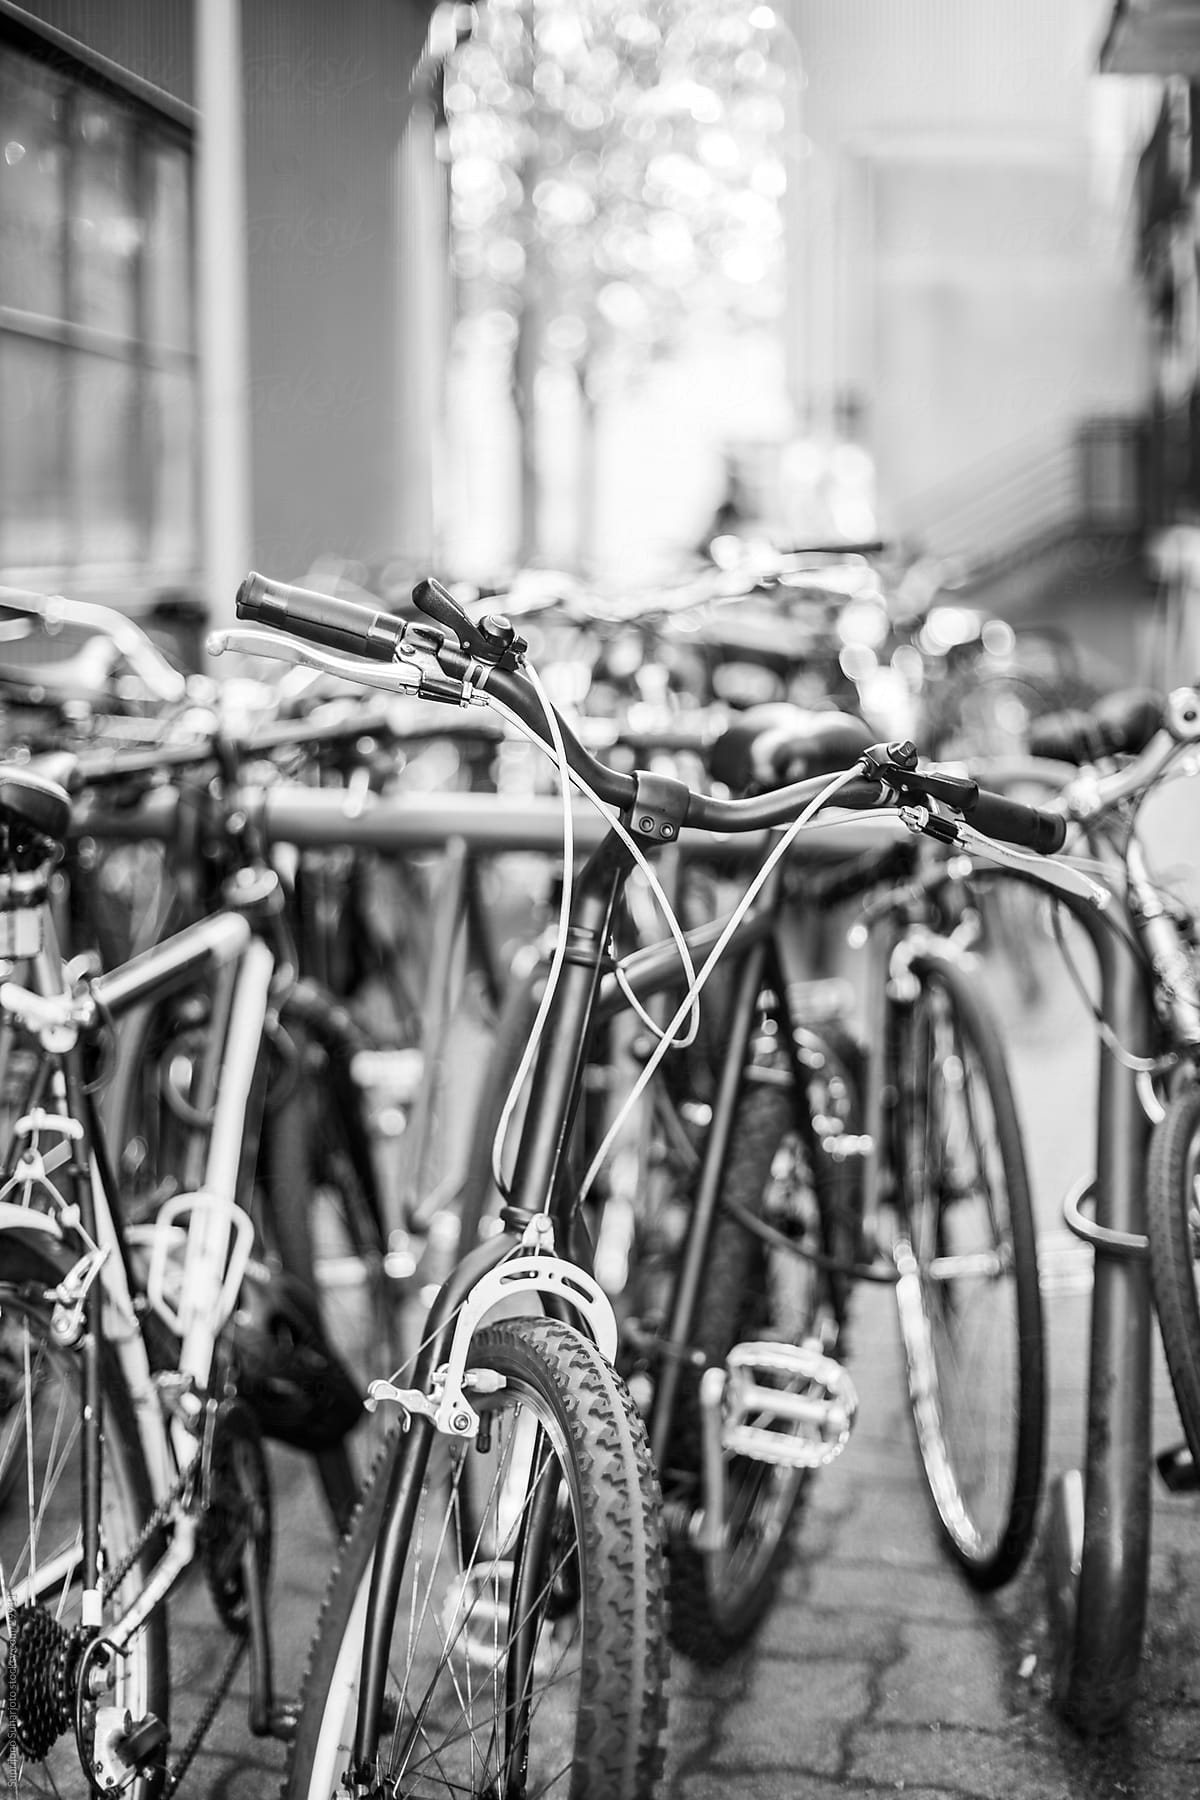 Parked bicycles in black and white